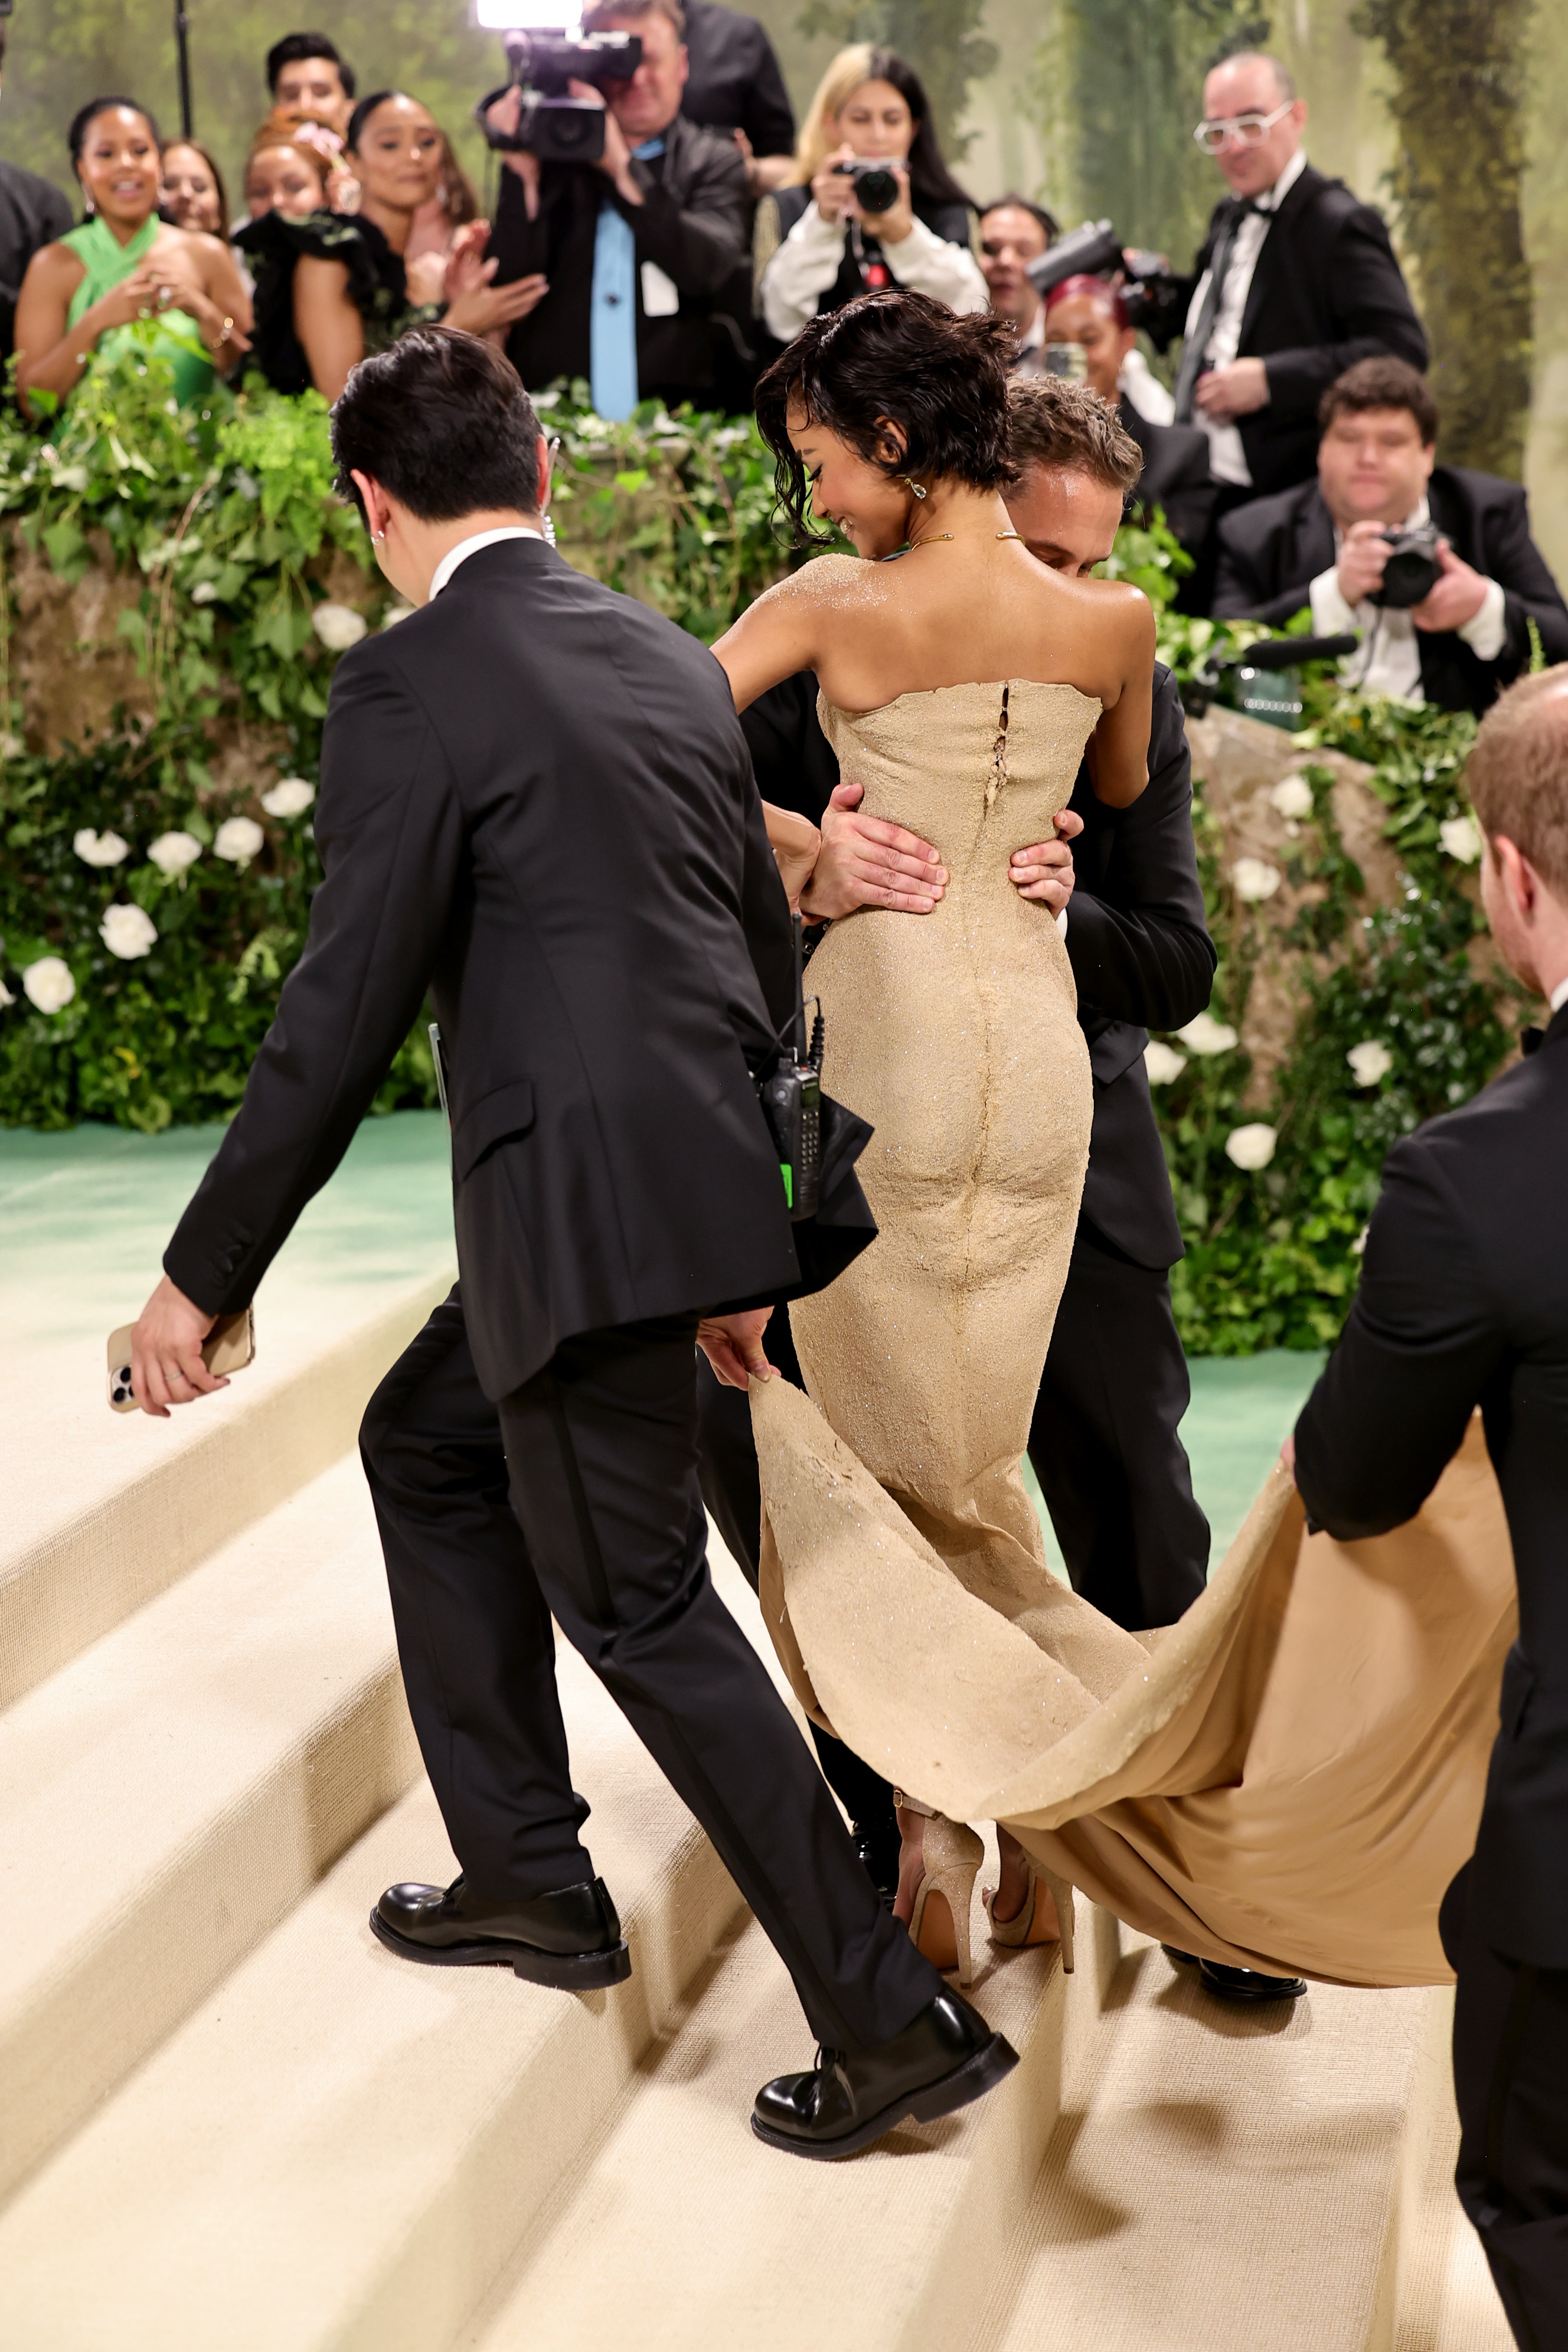 Tyla in an elegant backless gown with a flowing train being lifted by a man as two others carry her train